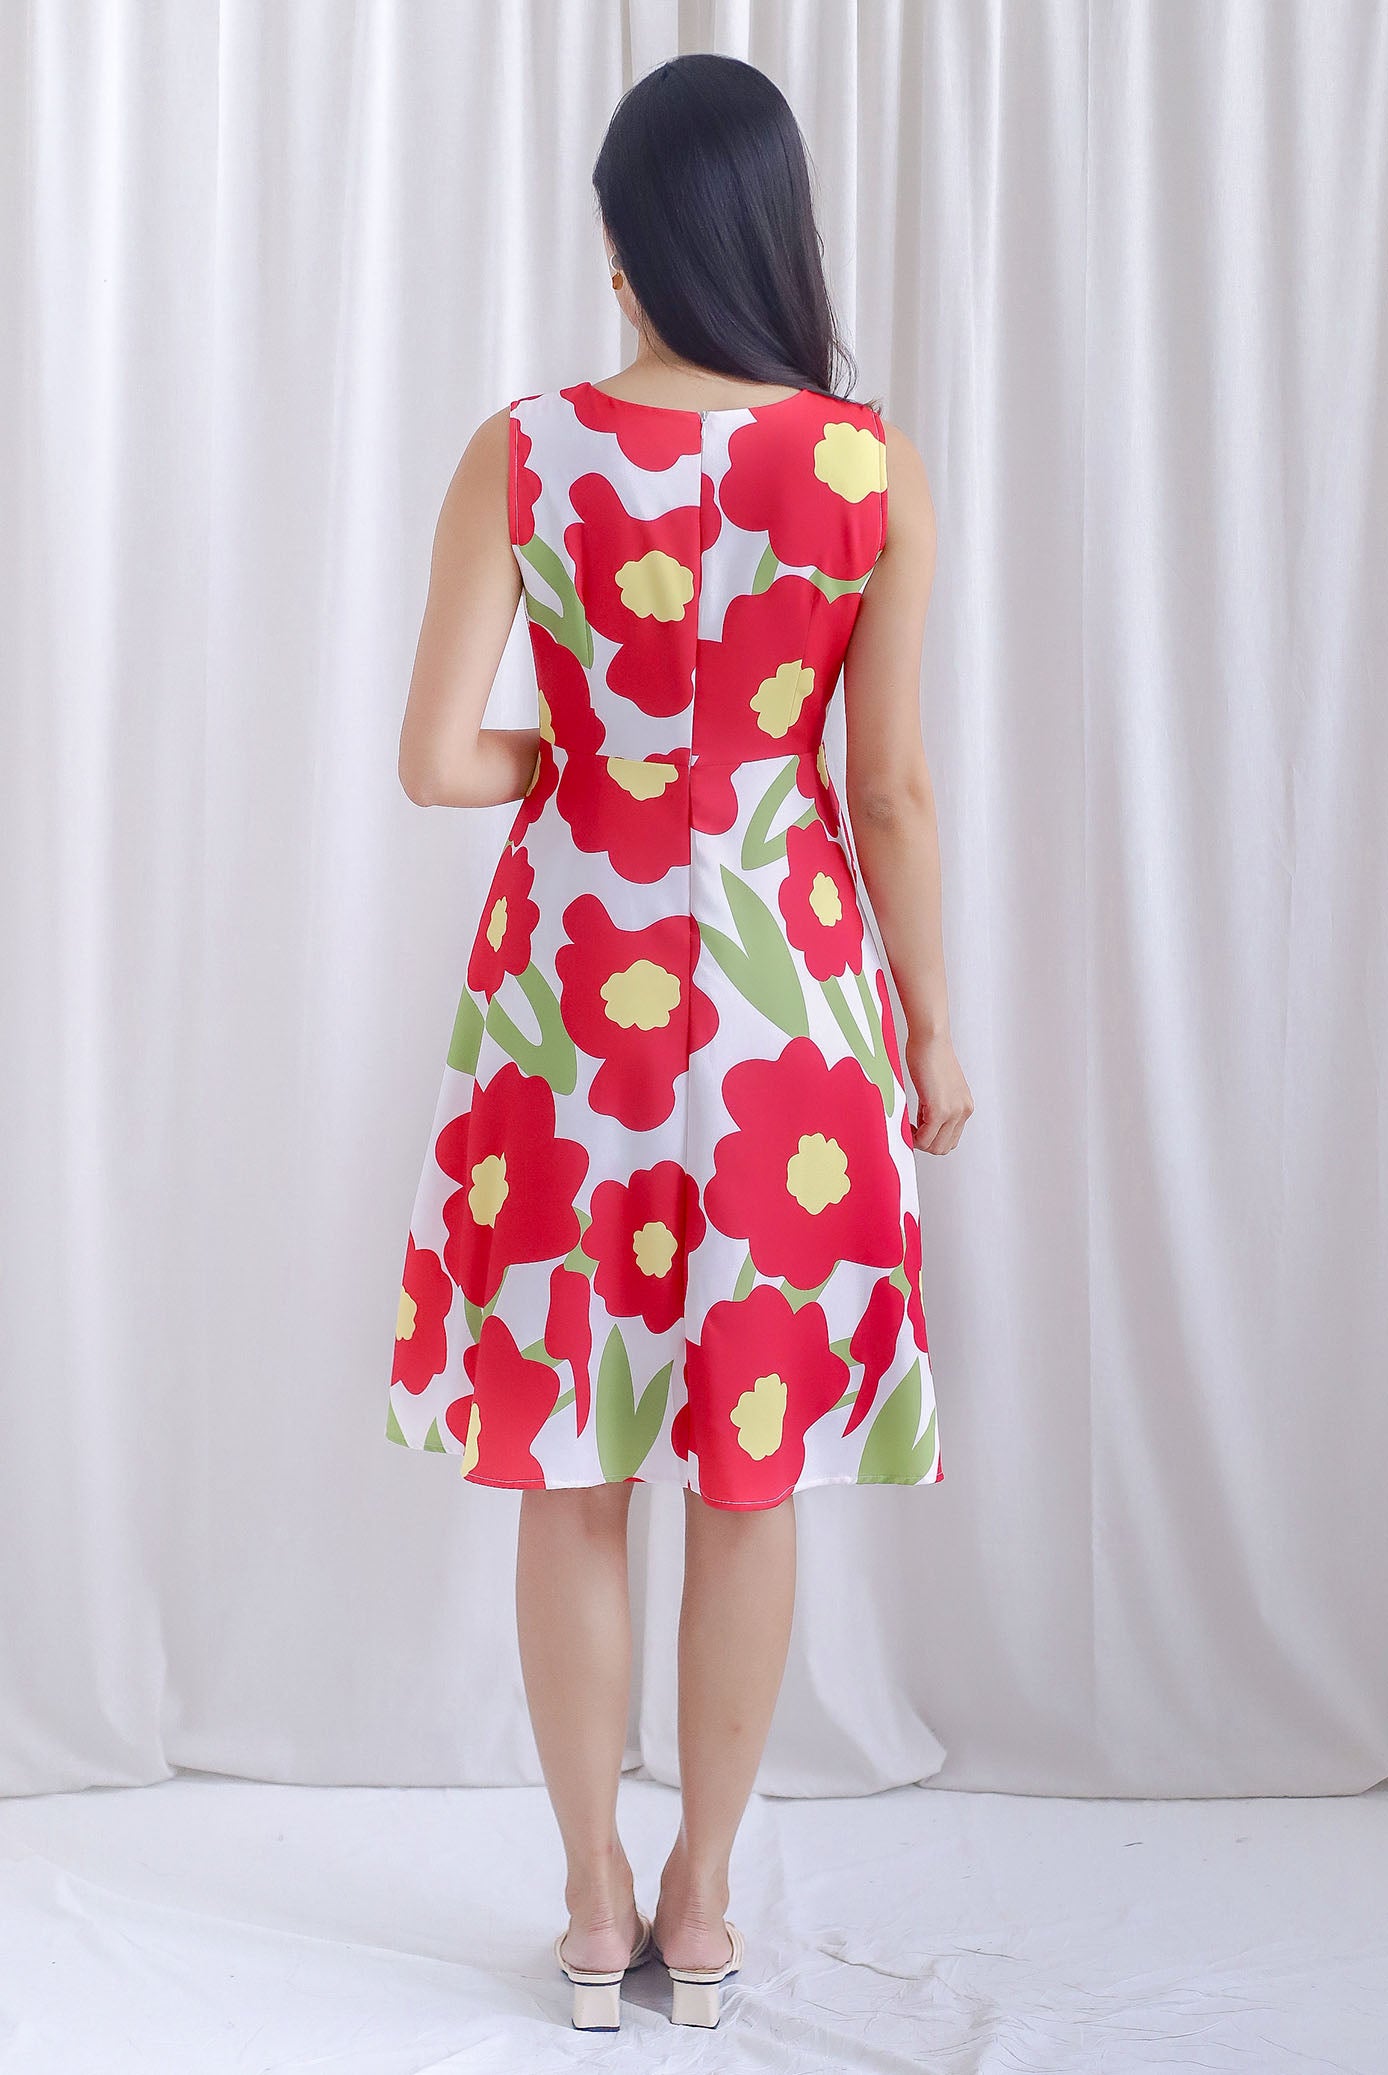 Jennett Oriental Pearl Buttons Floral Dress In Red